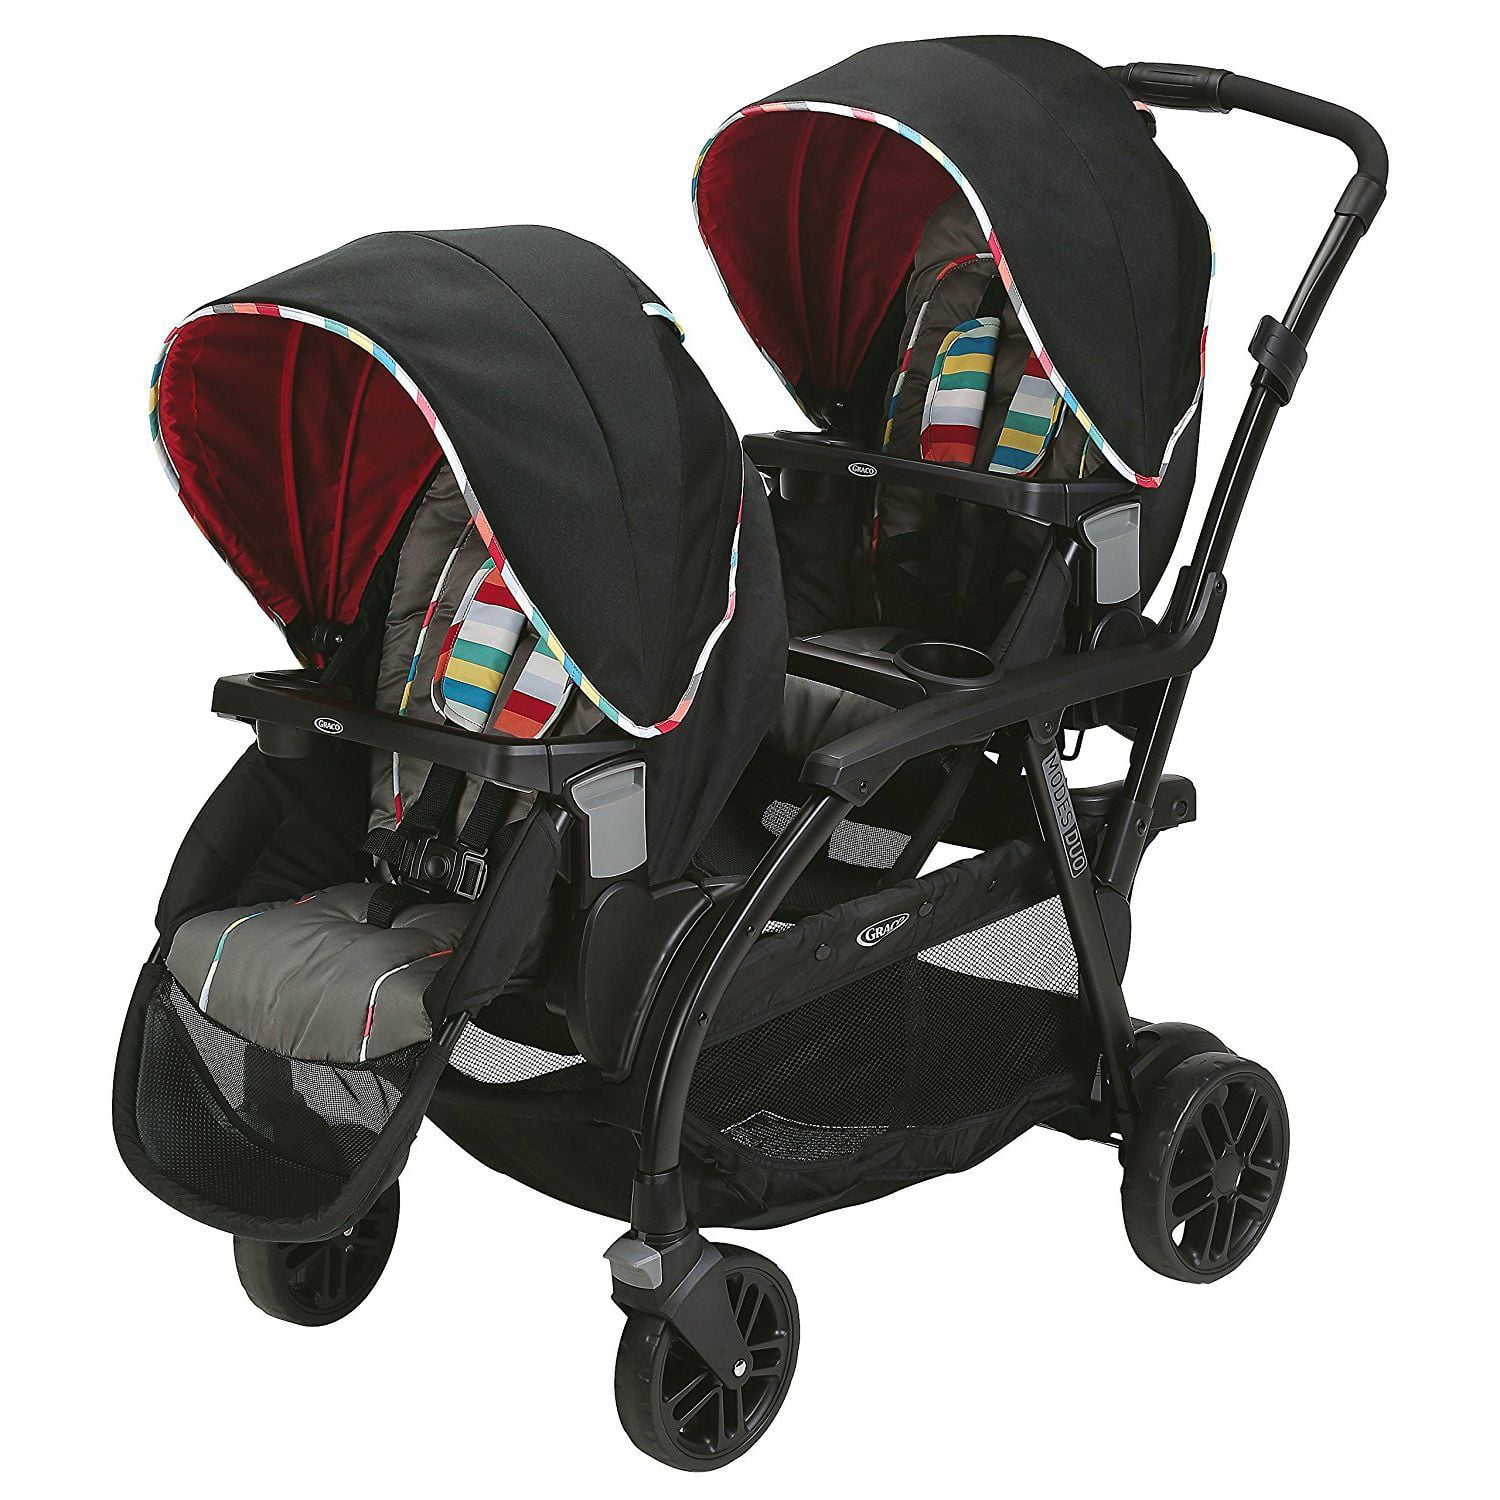 play double stroller